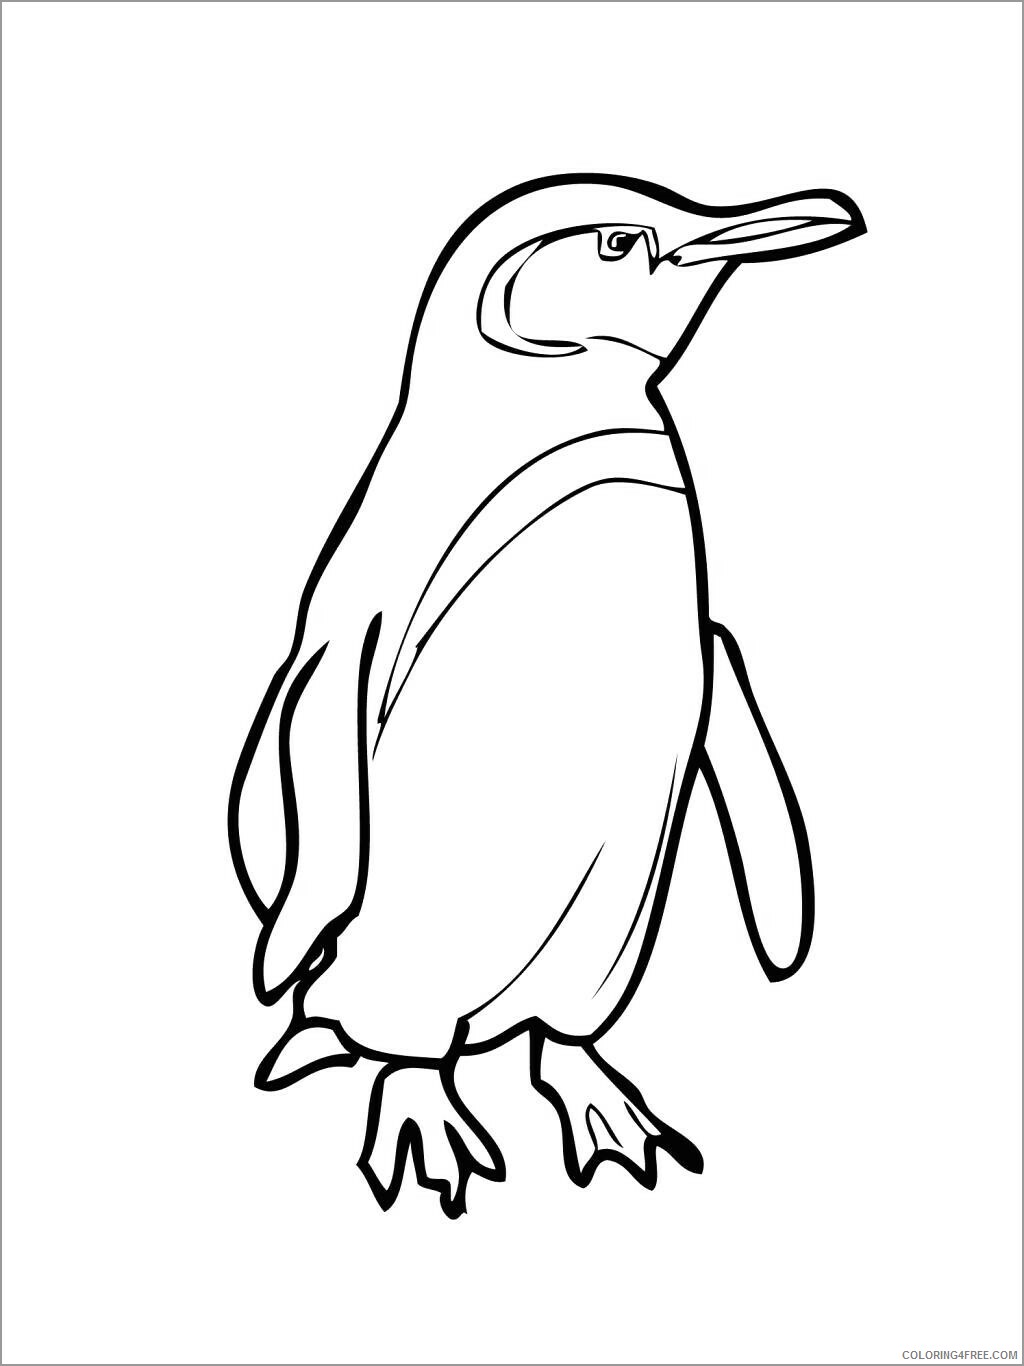 Penguins Coloring Pages Animal Printable Sheets of a penguin 2021 3816 Coloring4free